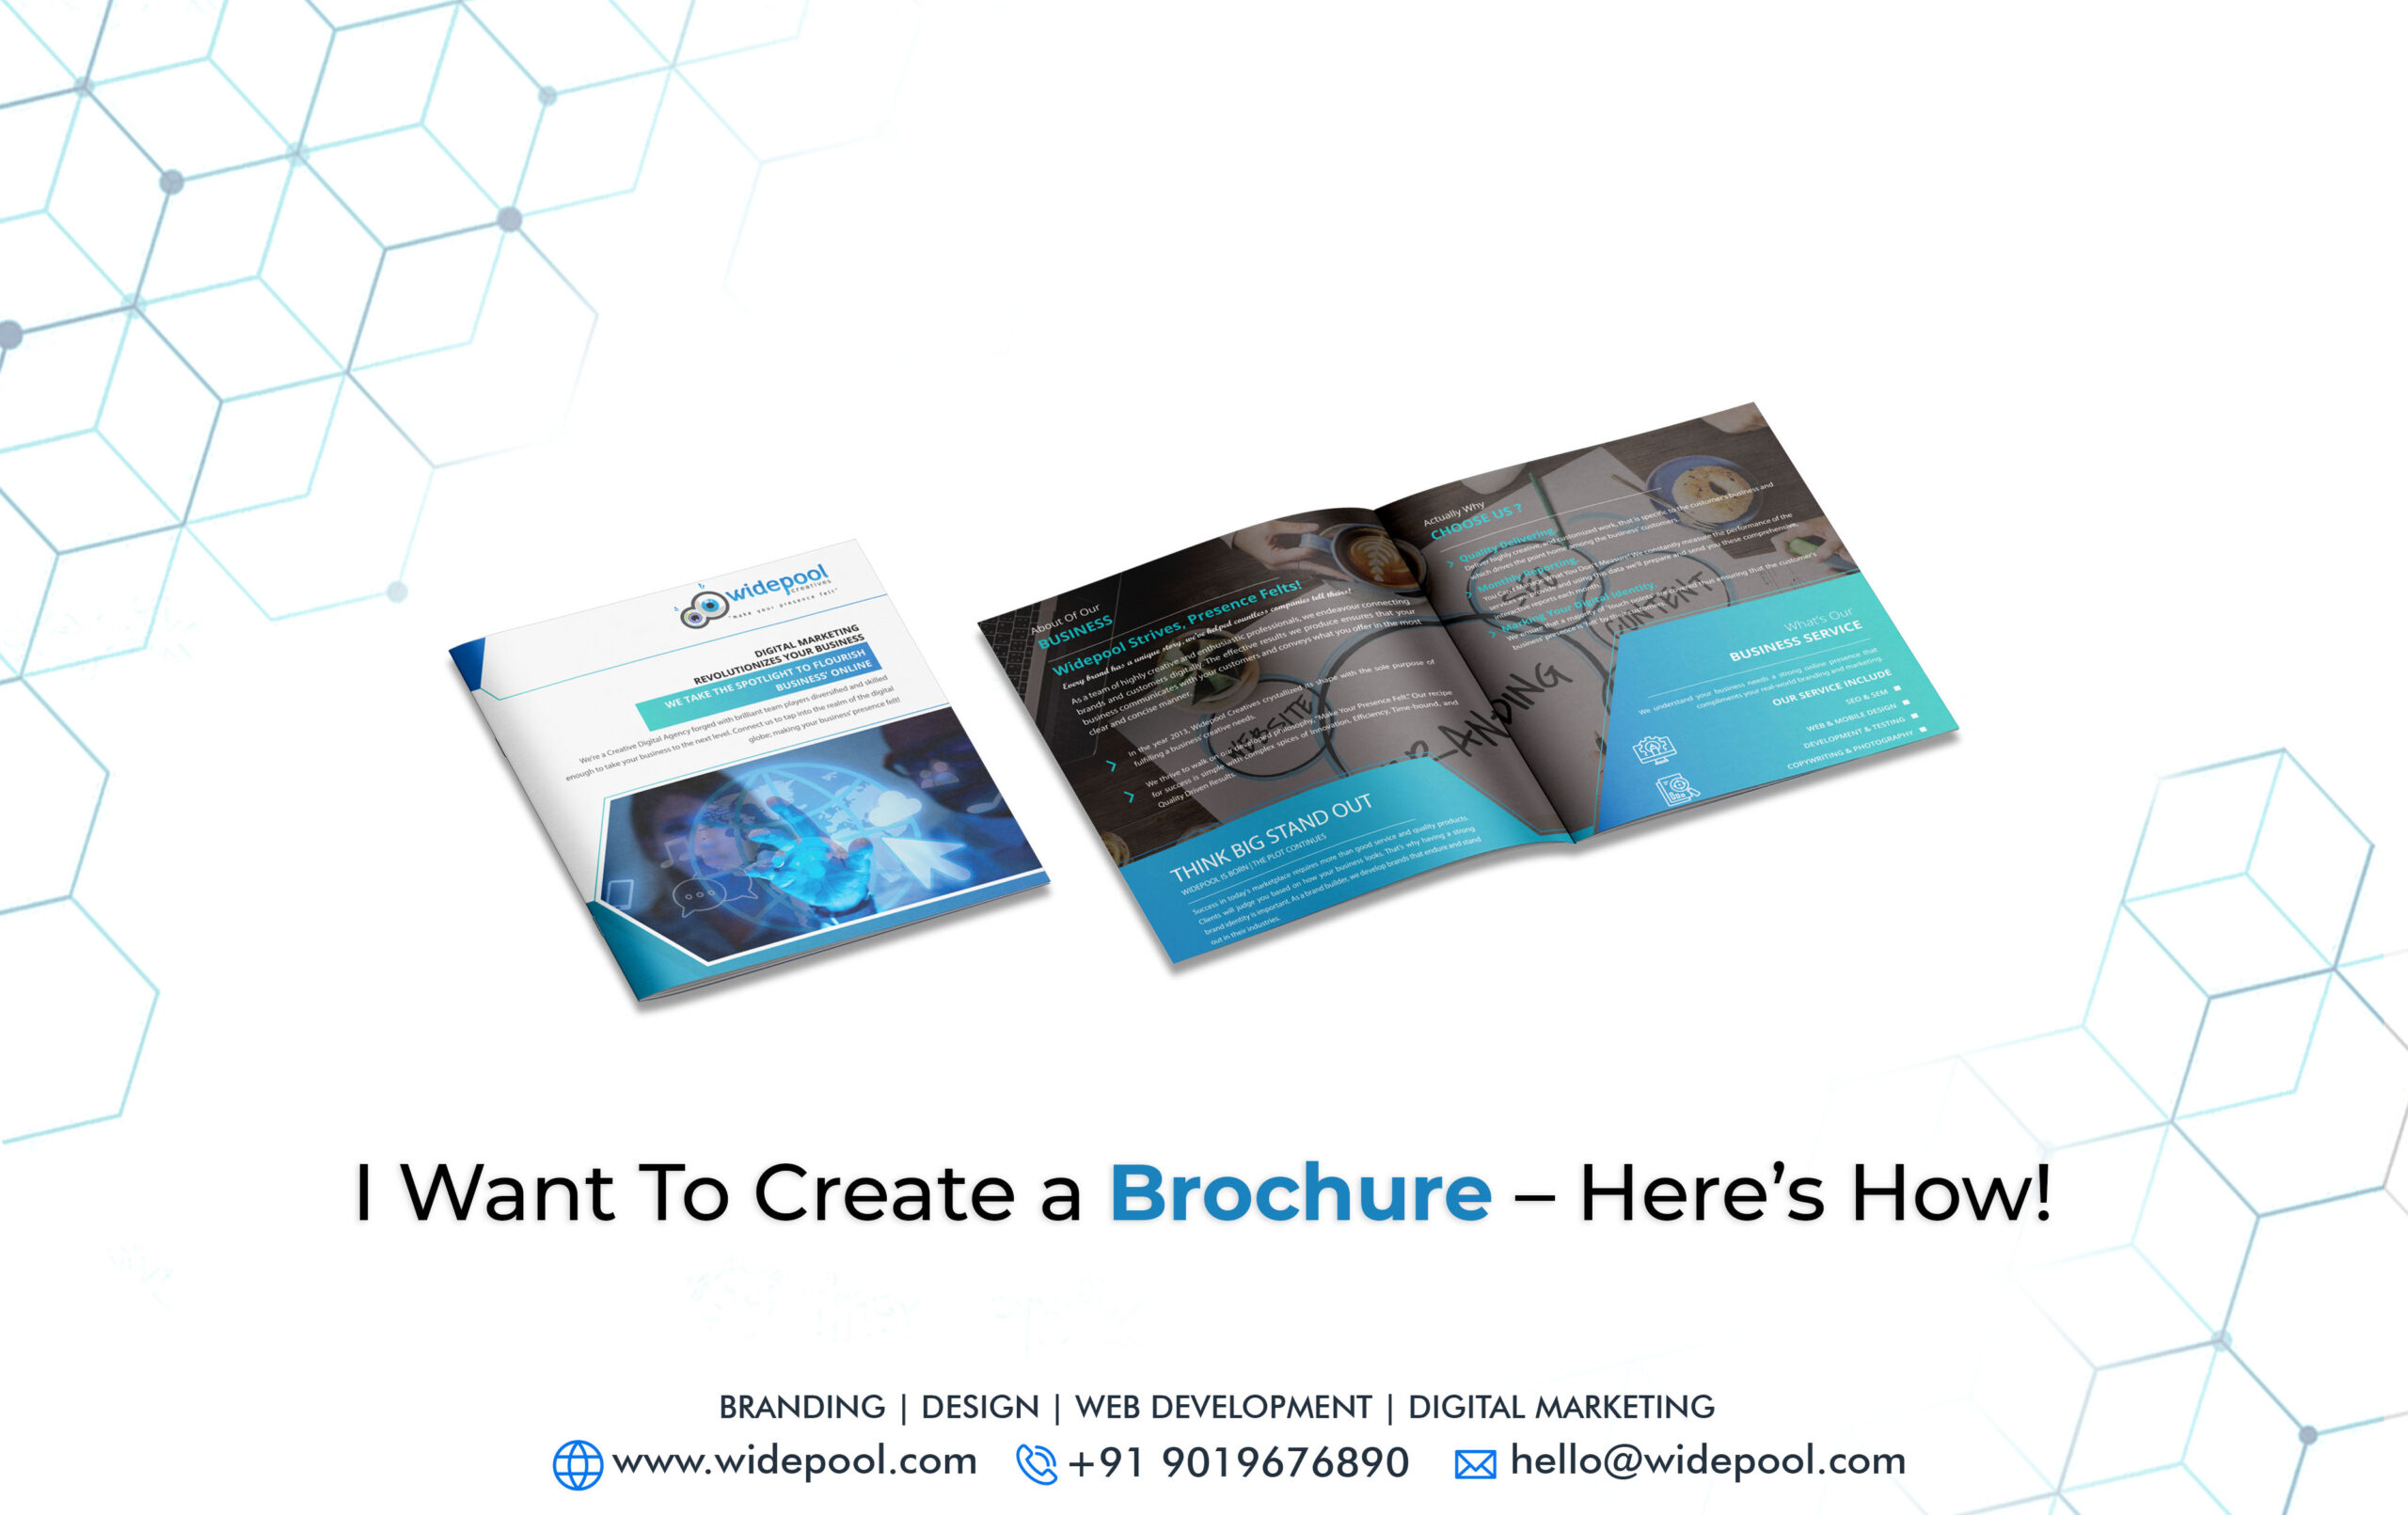 I Want to Create a Brochure – Here’s How!